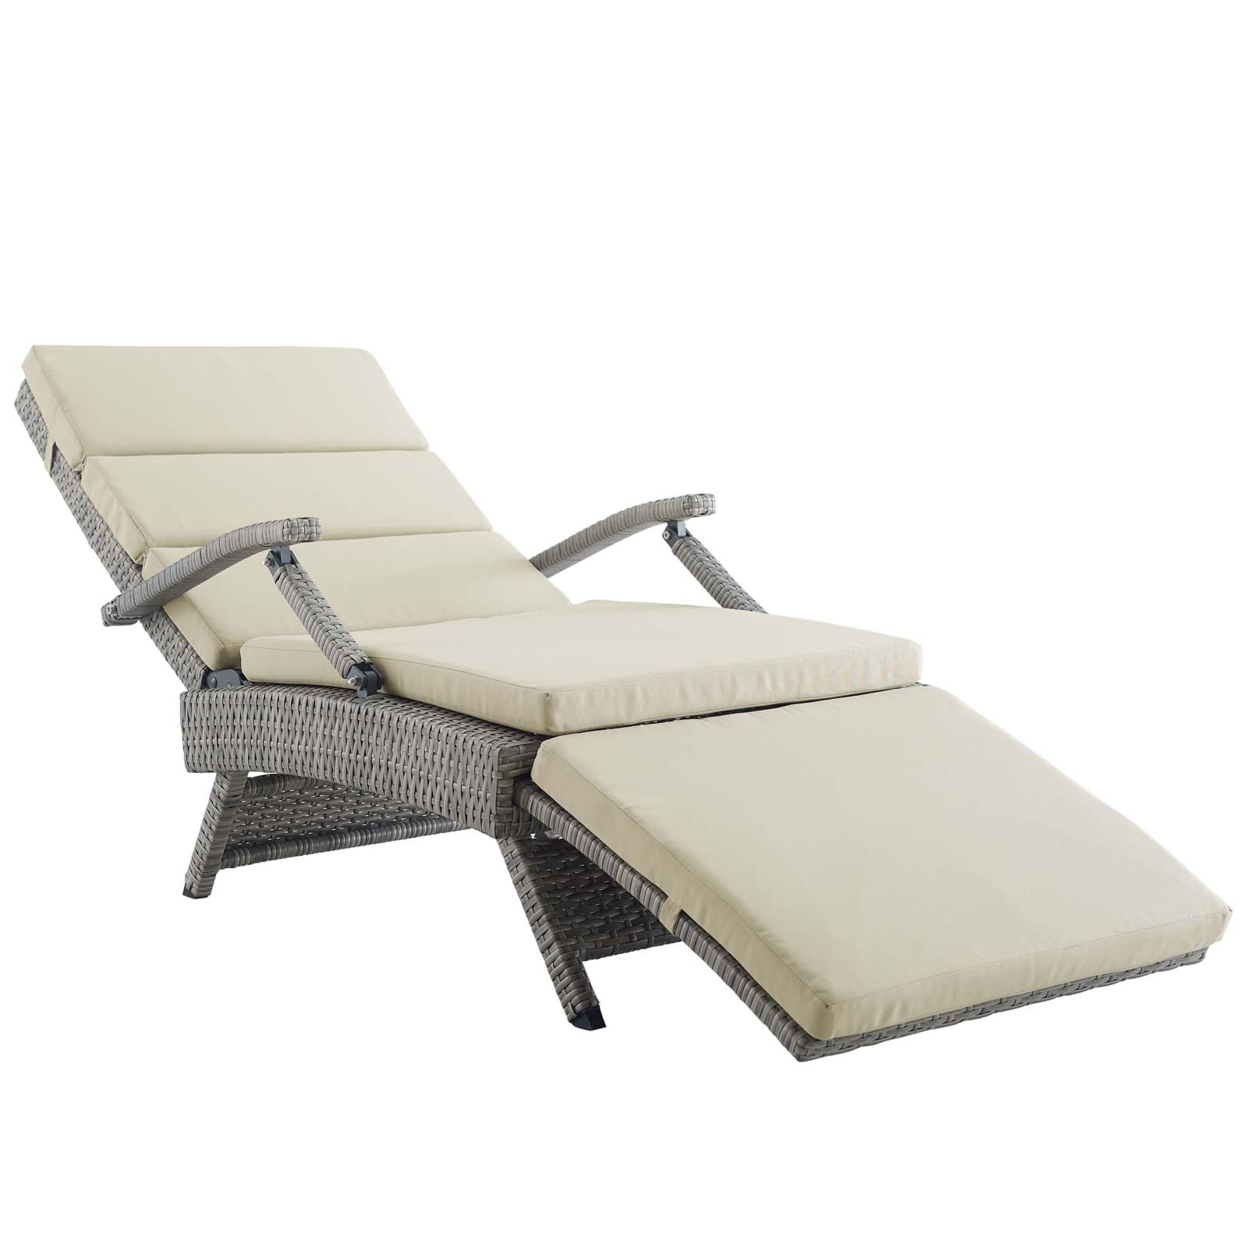 Envisage Chaise Outdoor Patio Wicker Rattan Lounge ChairLight Gray Beige - image 1 of 7